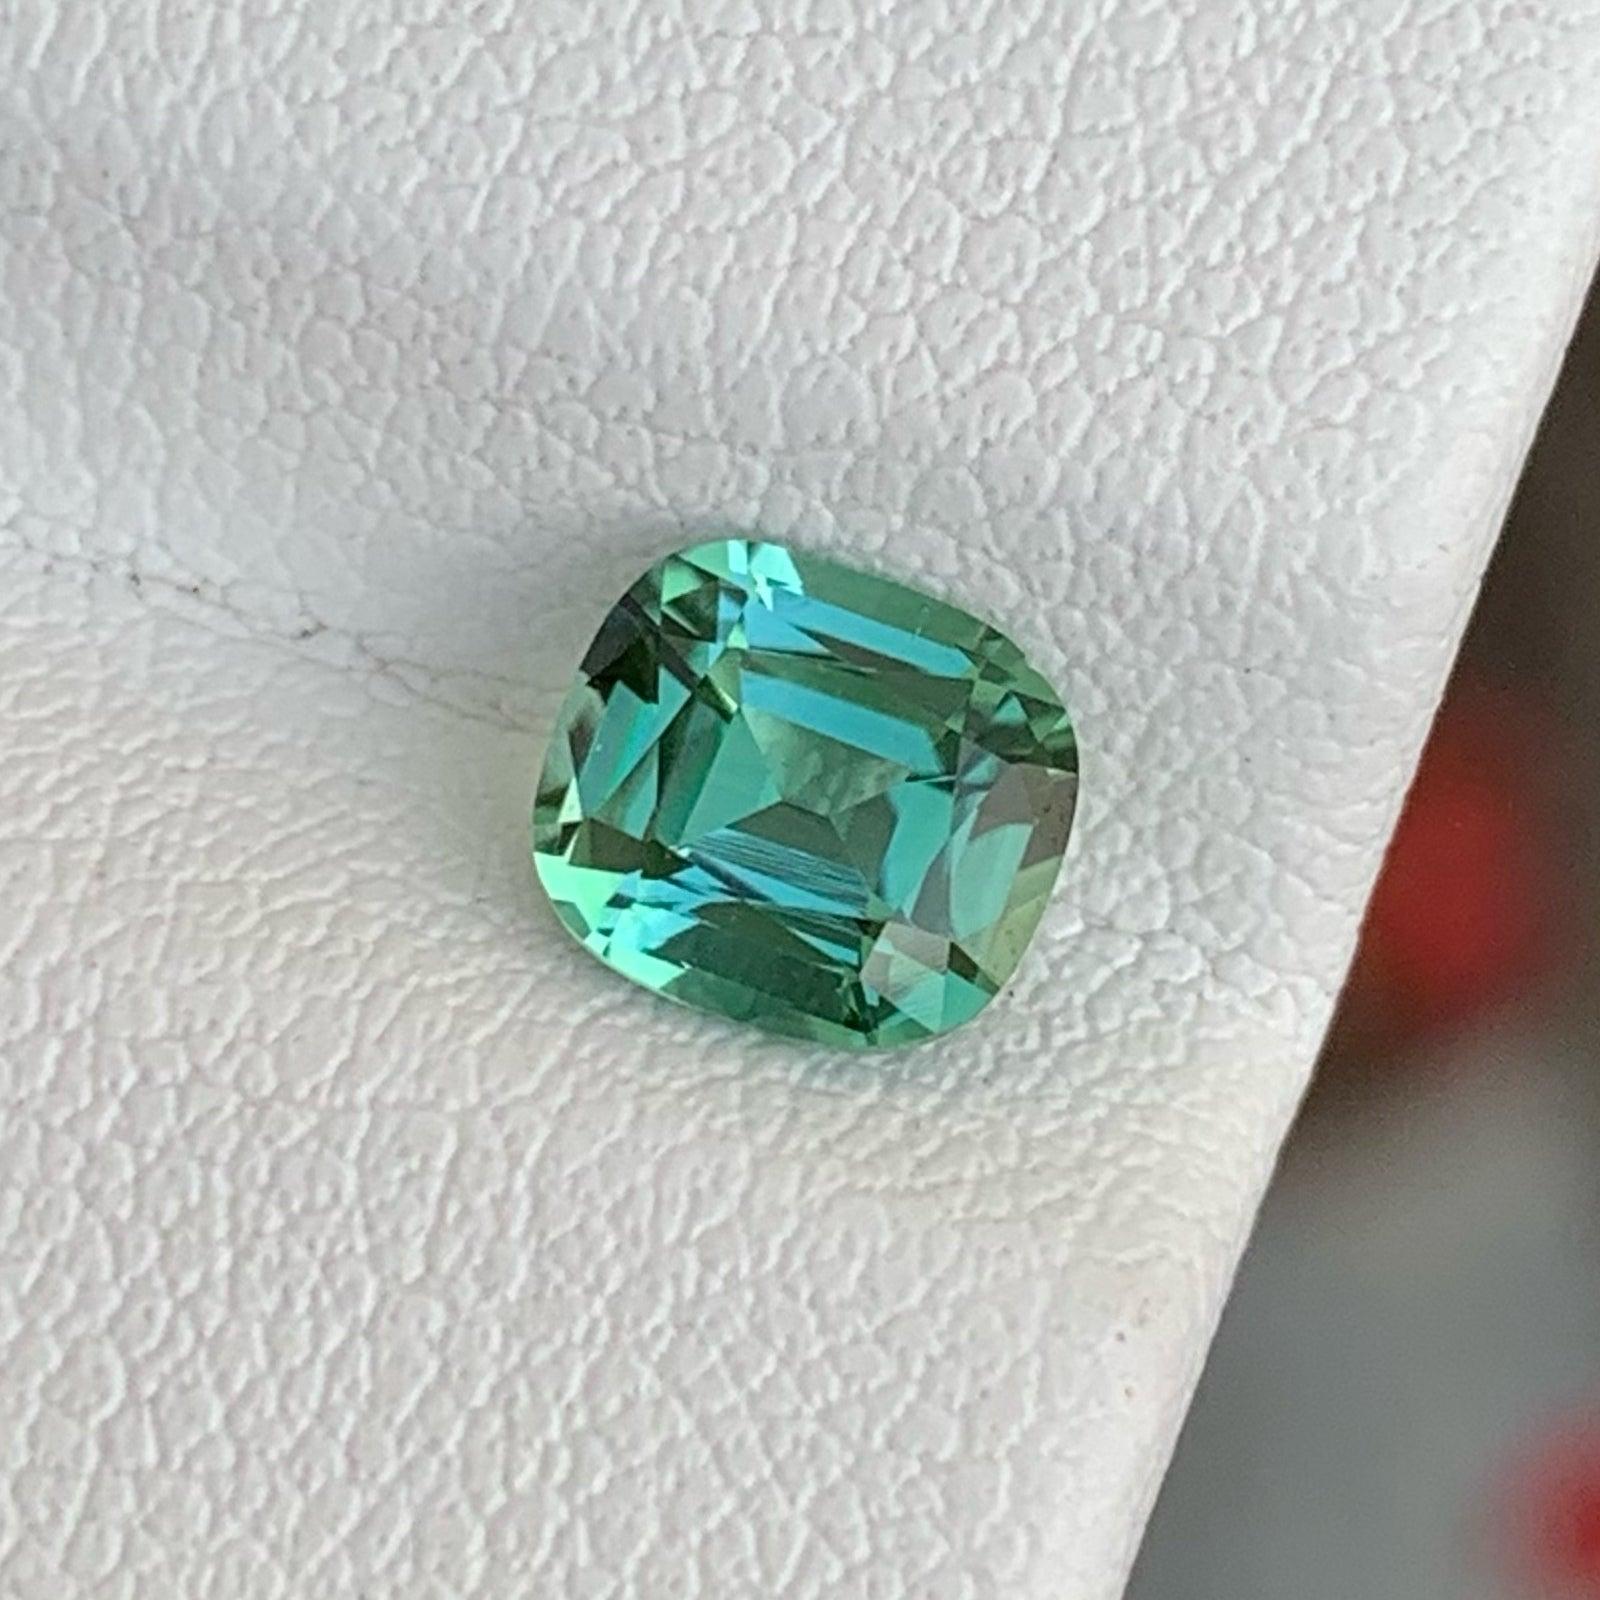 Modern Excellent Mint Green Loose Tourmaline Stone 1.05 Carats Fine Jewelry Fine Gems For Sale